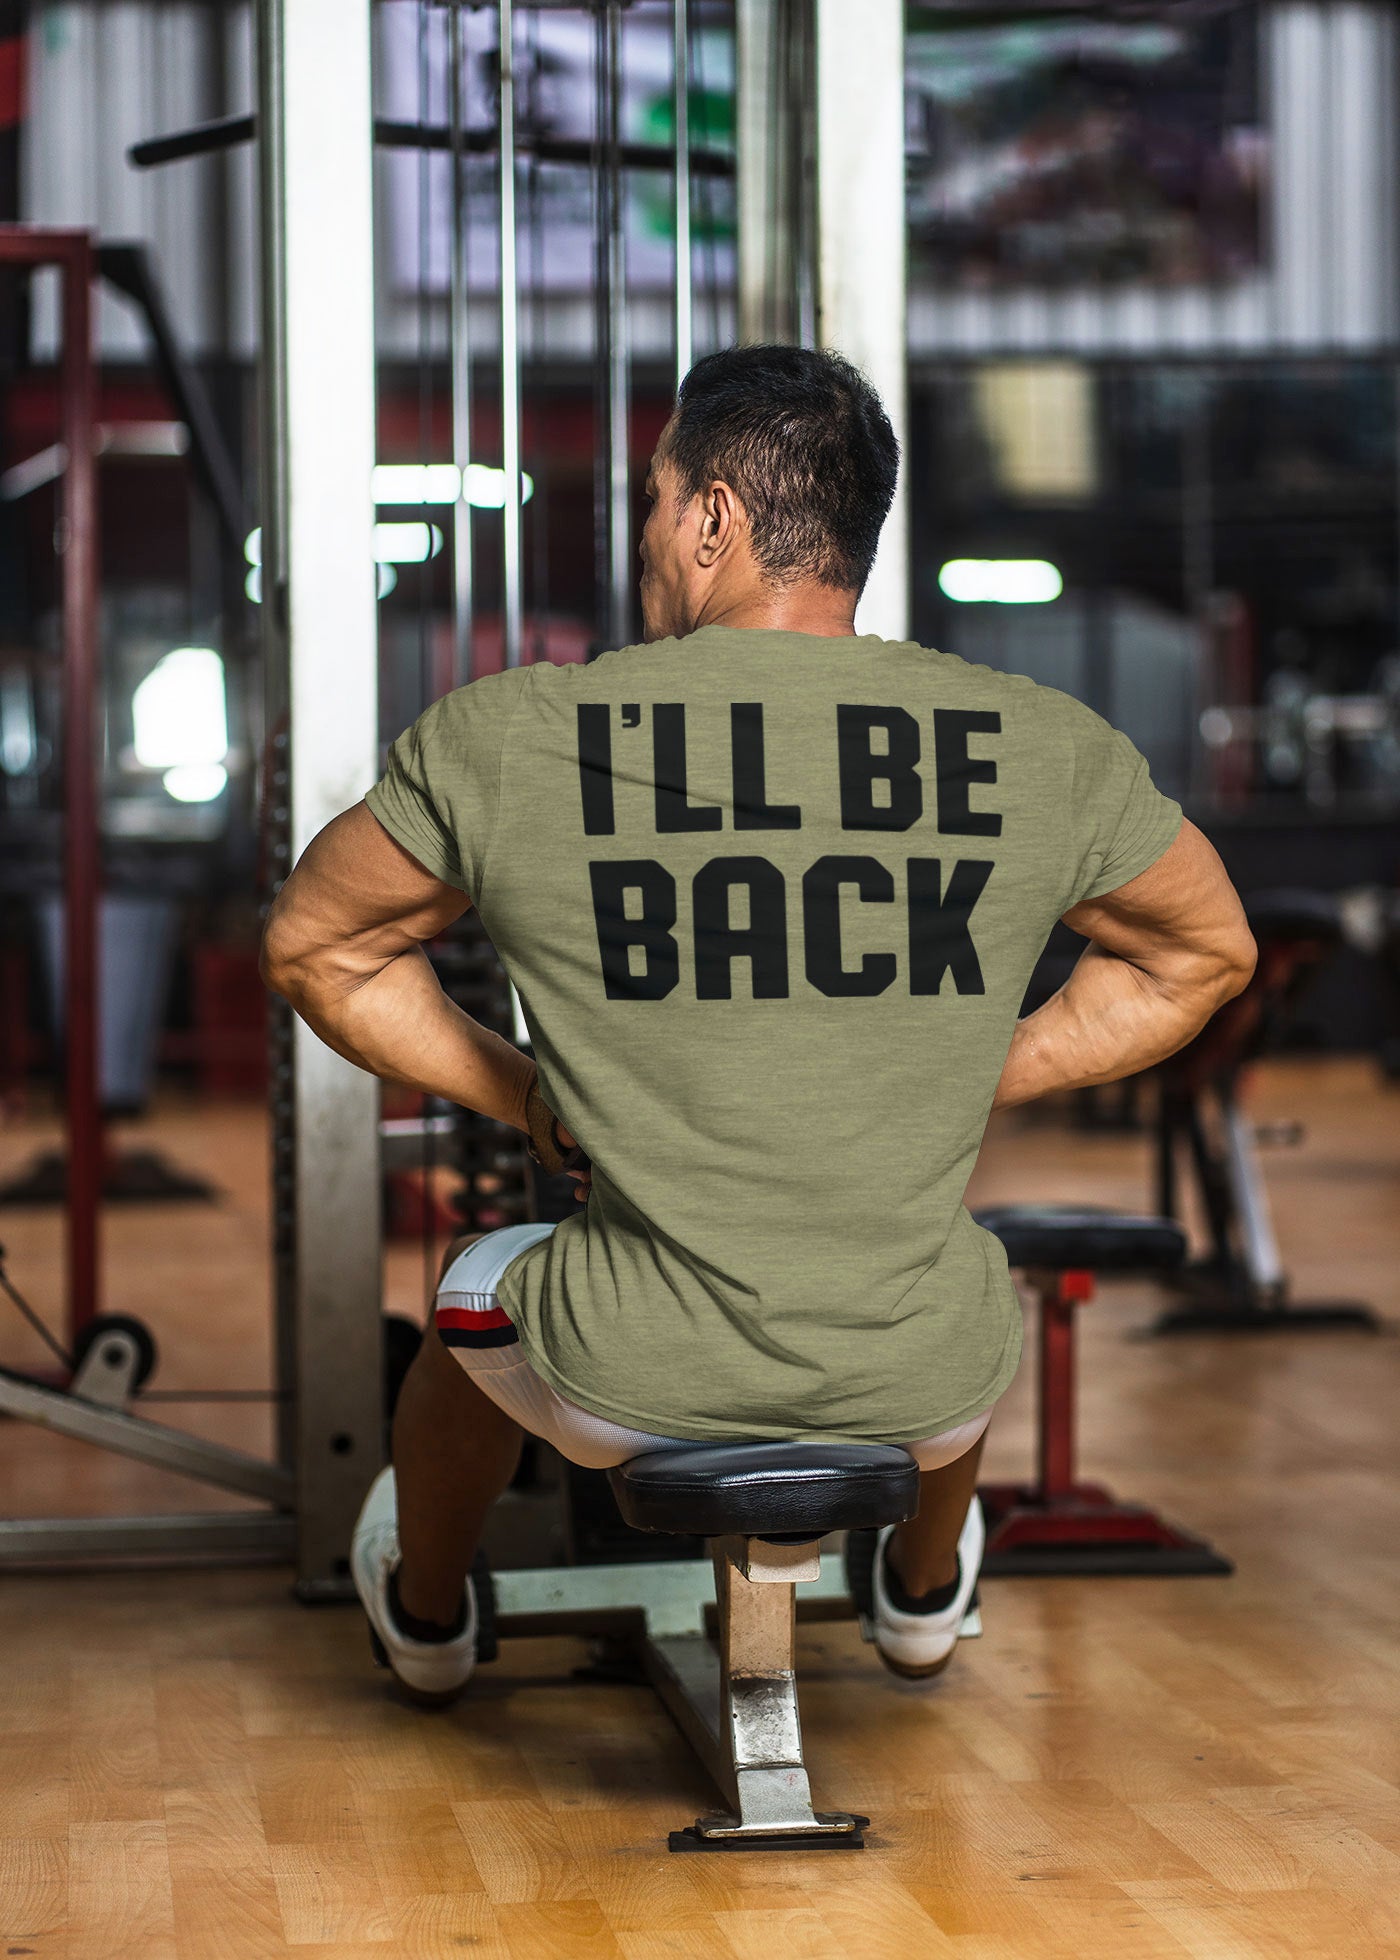 019. GYM TIME - I'll BE BACK Workout T-Shirt